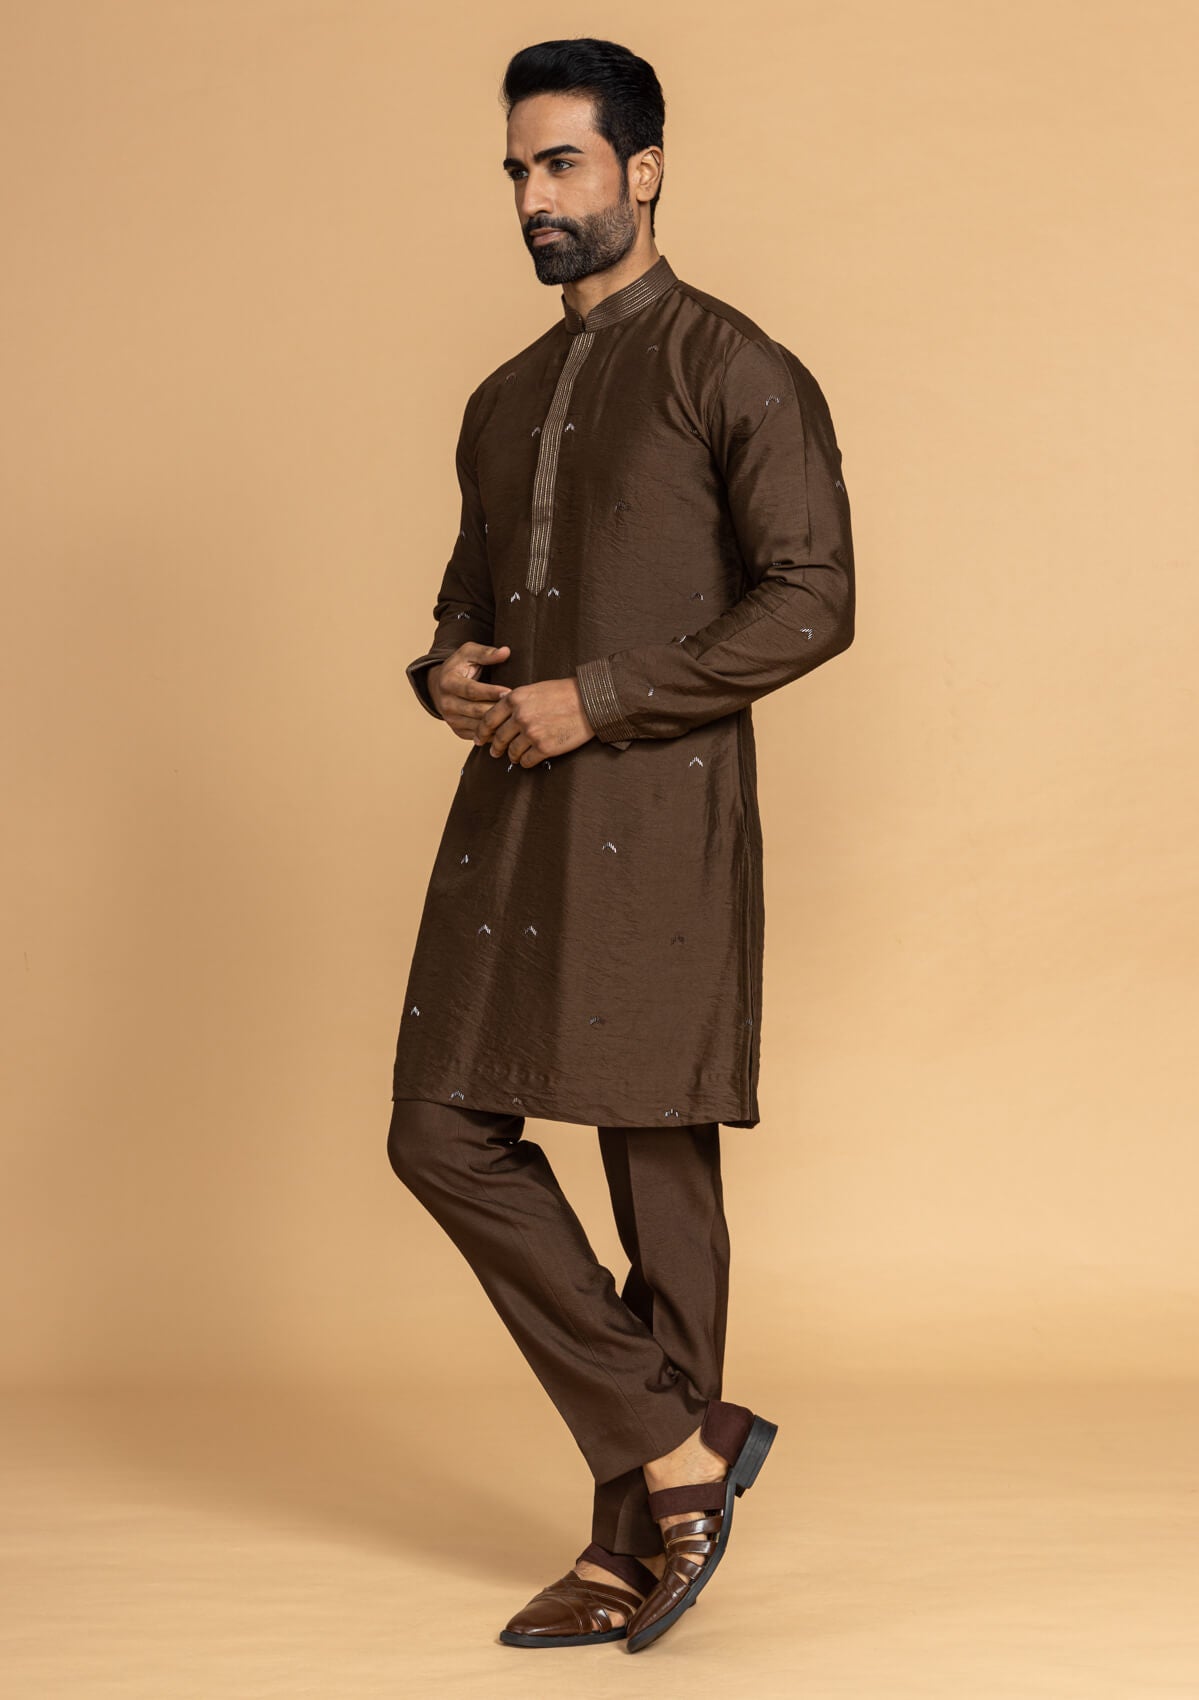 Classic Indian outfit with a Kurta and fitted Bandi.